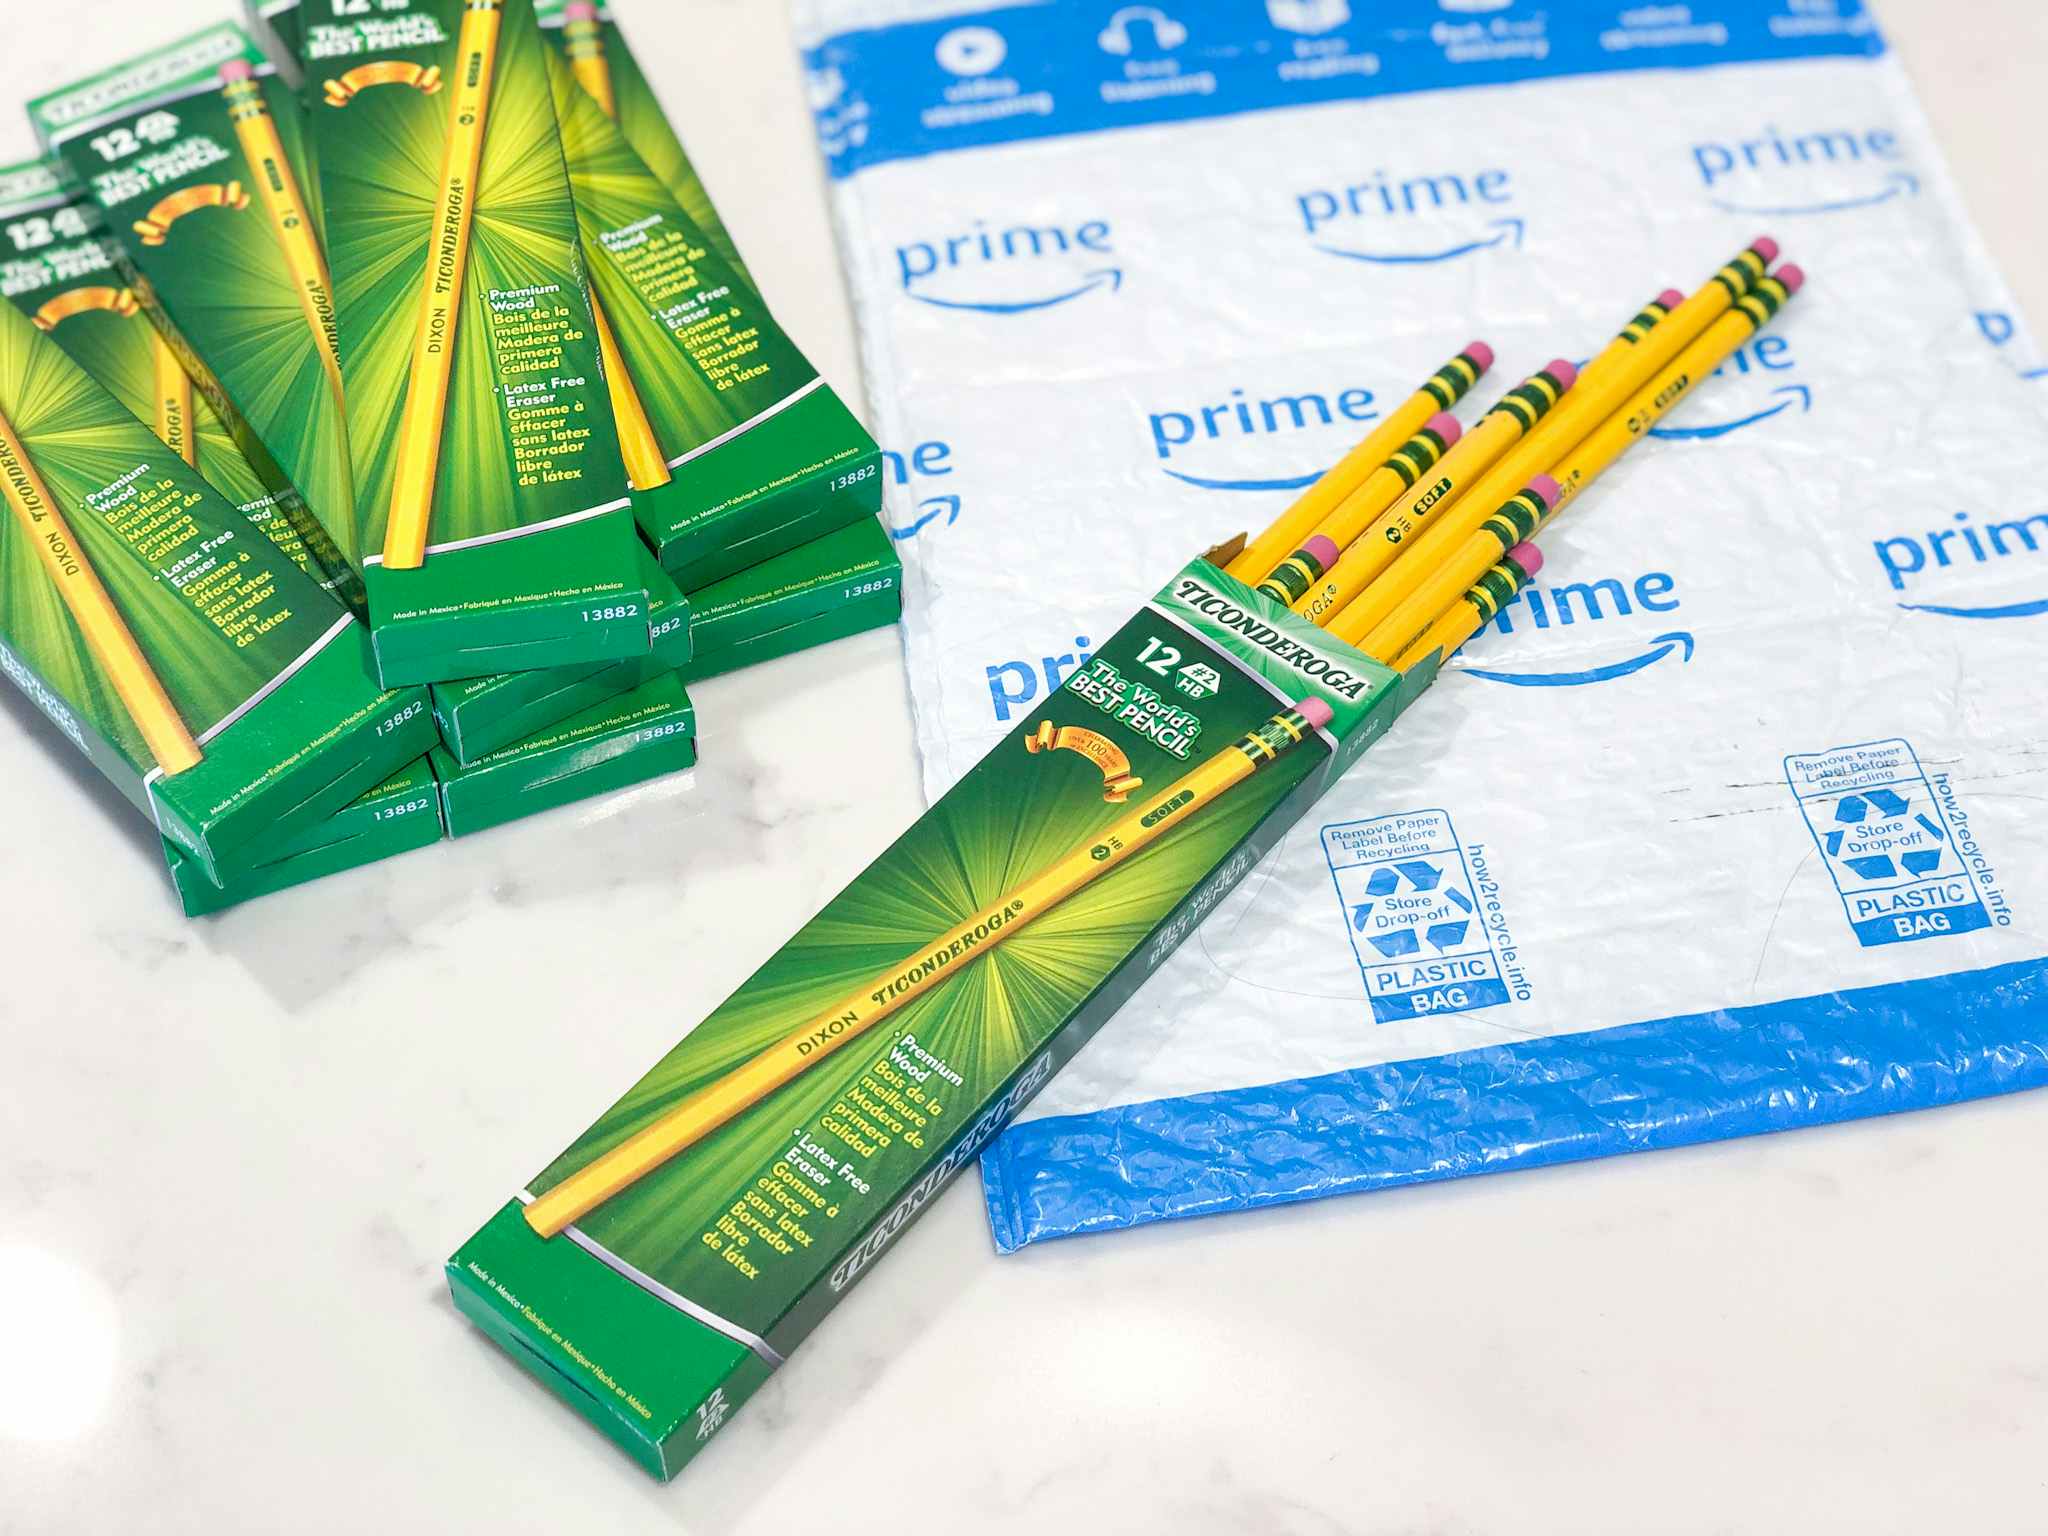 Load up on Crayola markers, crayons, and pencils from just $0.50 shipped  today